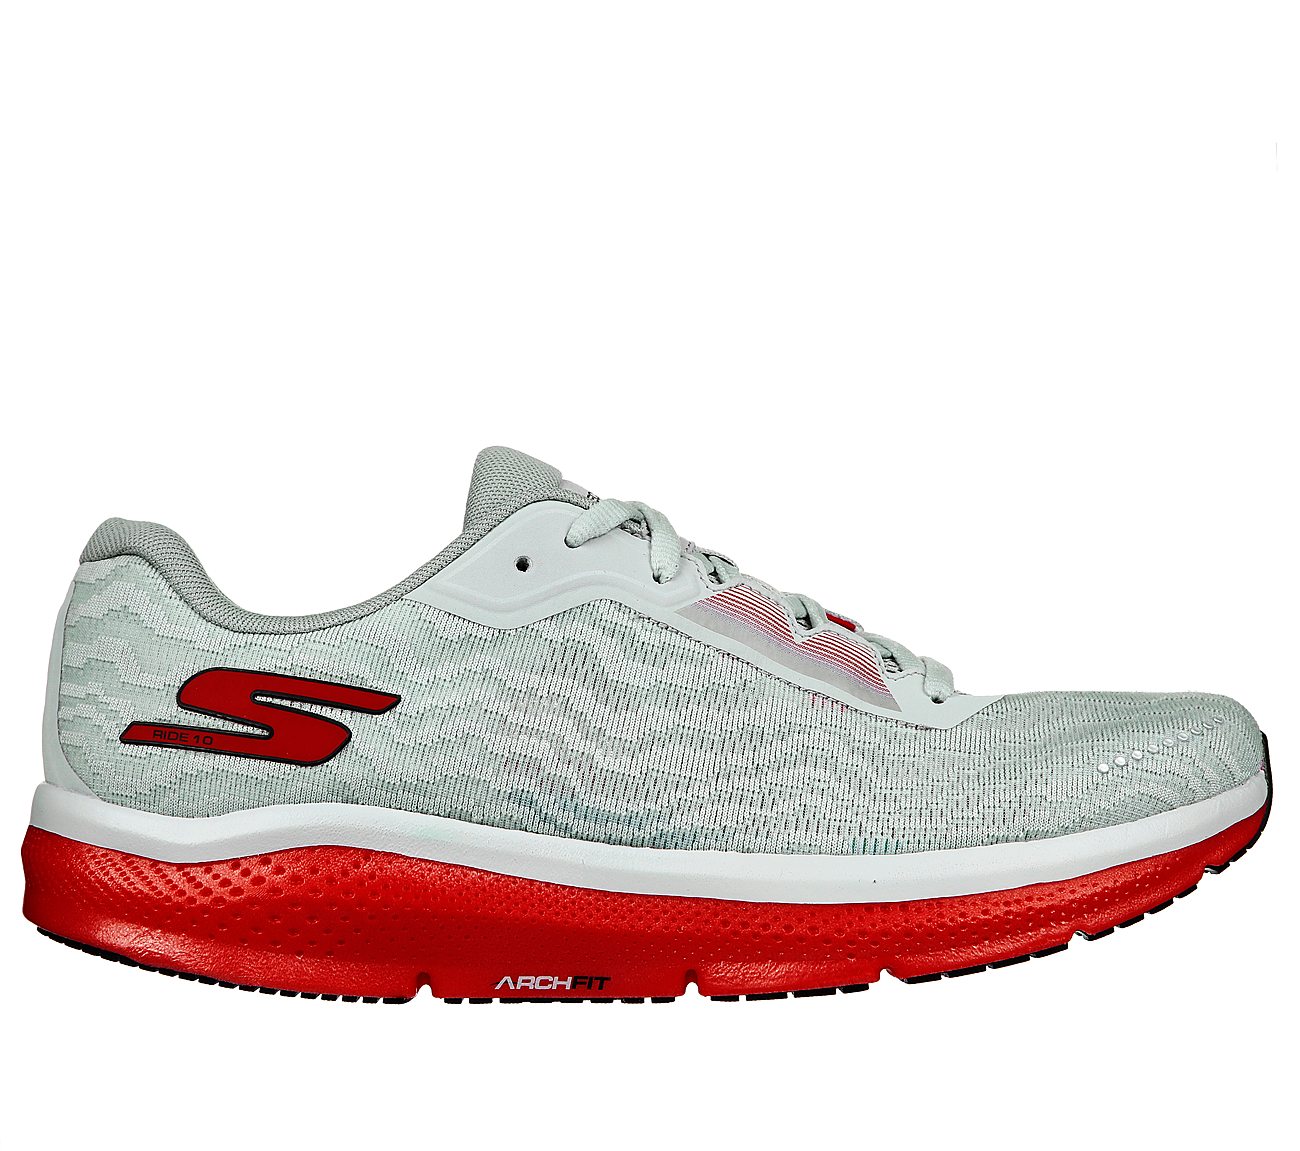 GO RUN RIDE 10, GREY/RED Footwear Lateral View